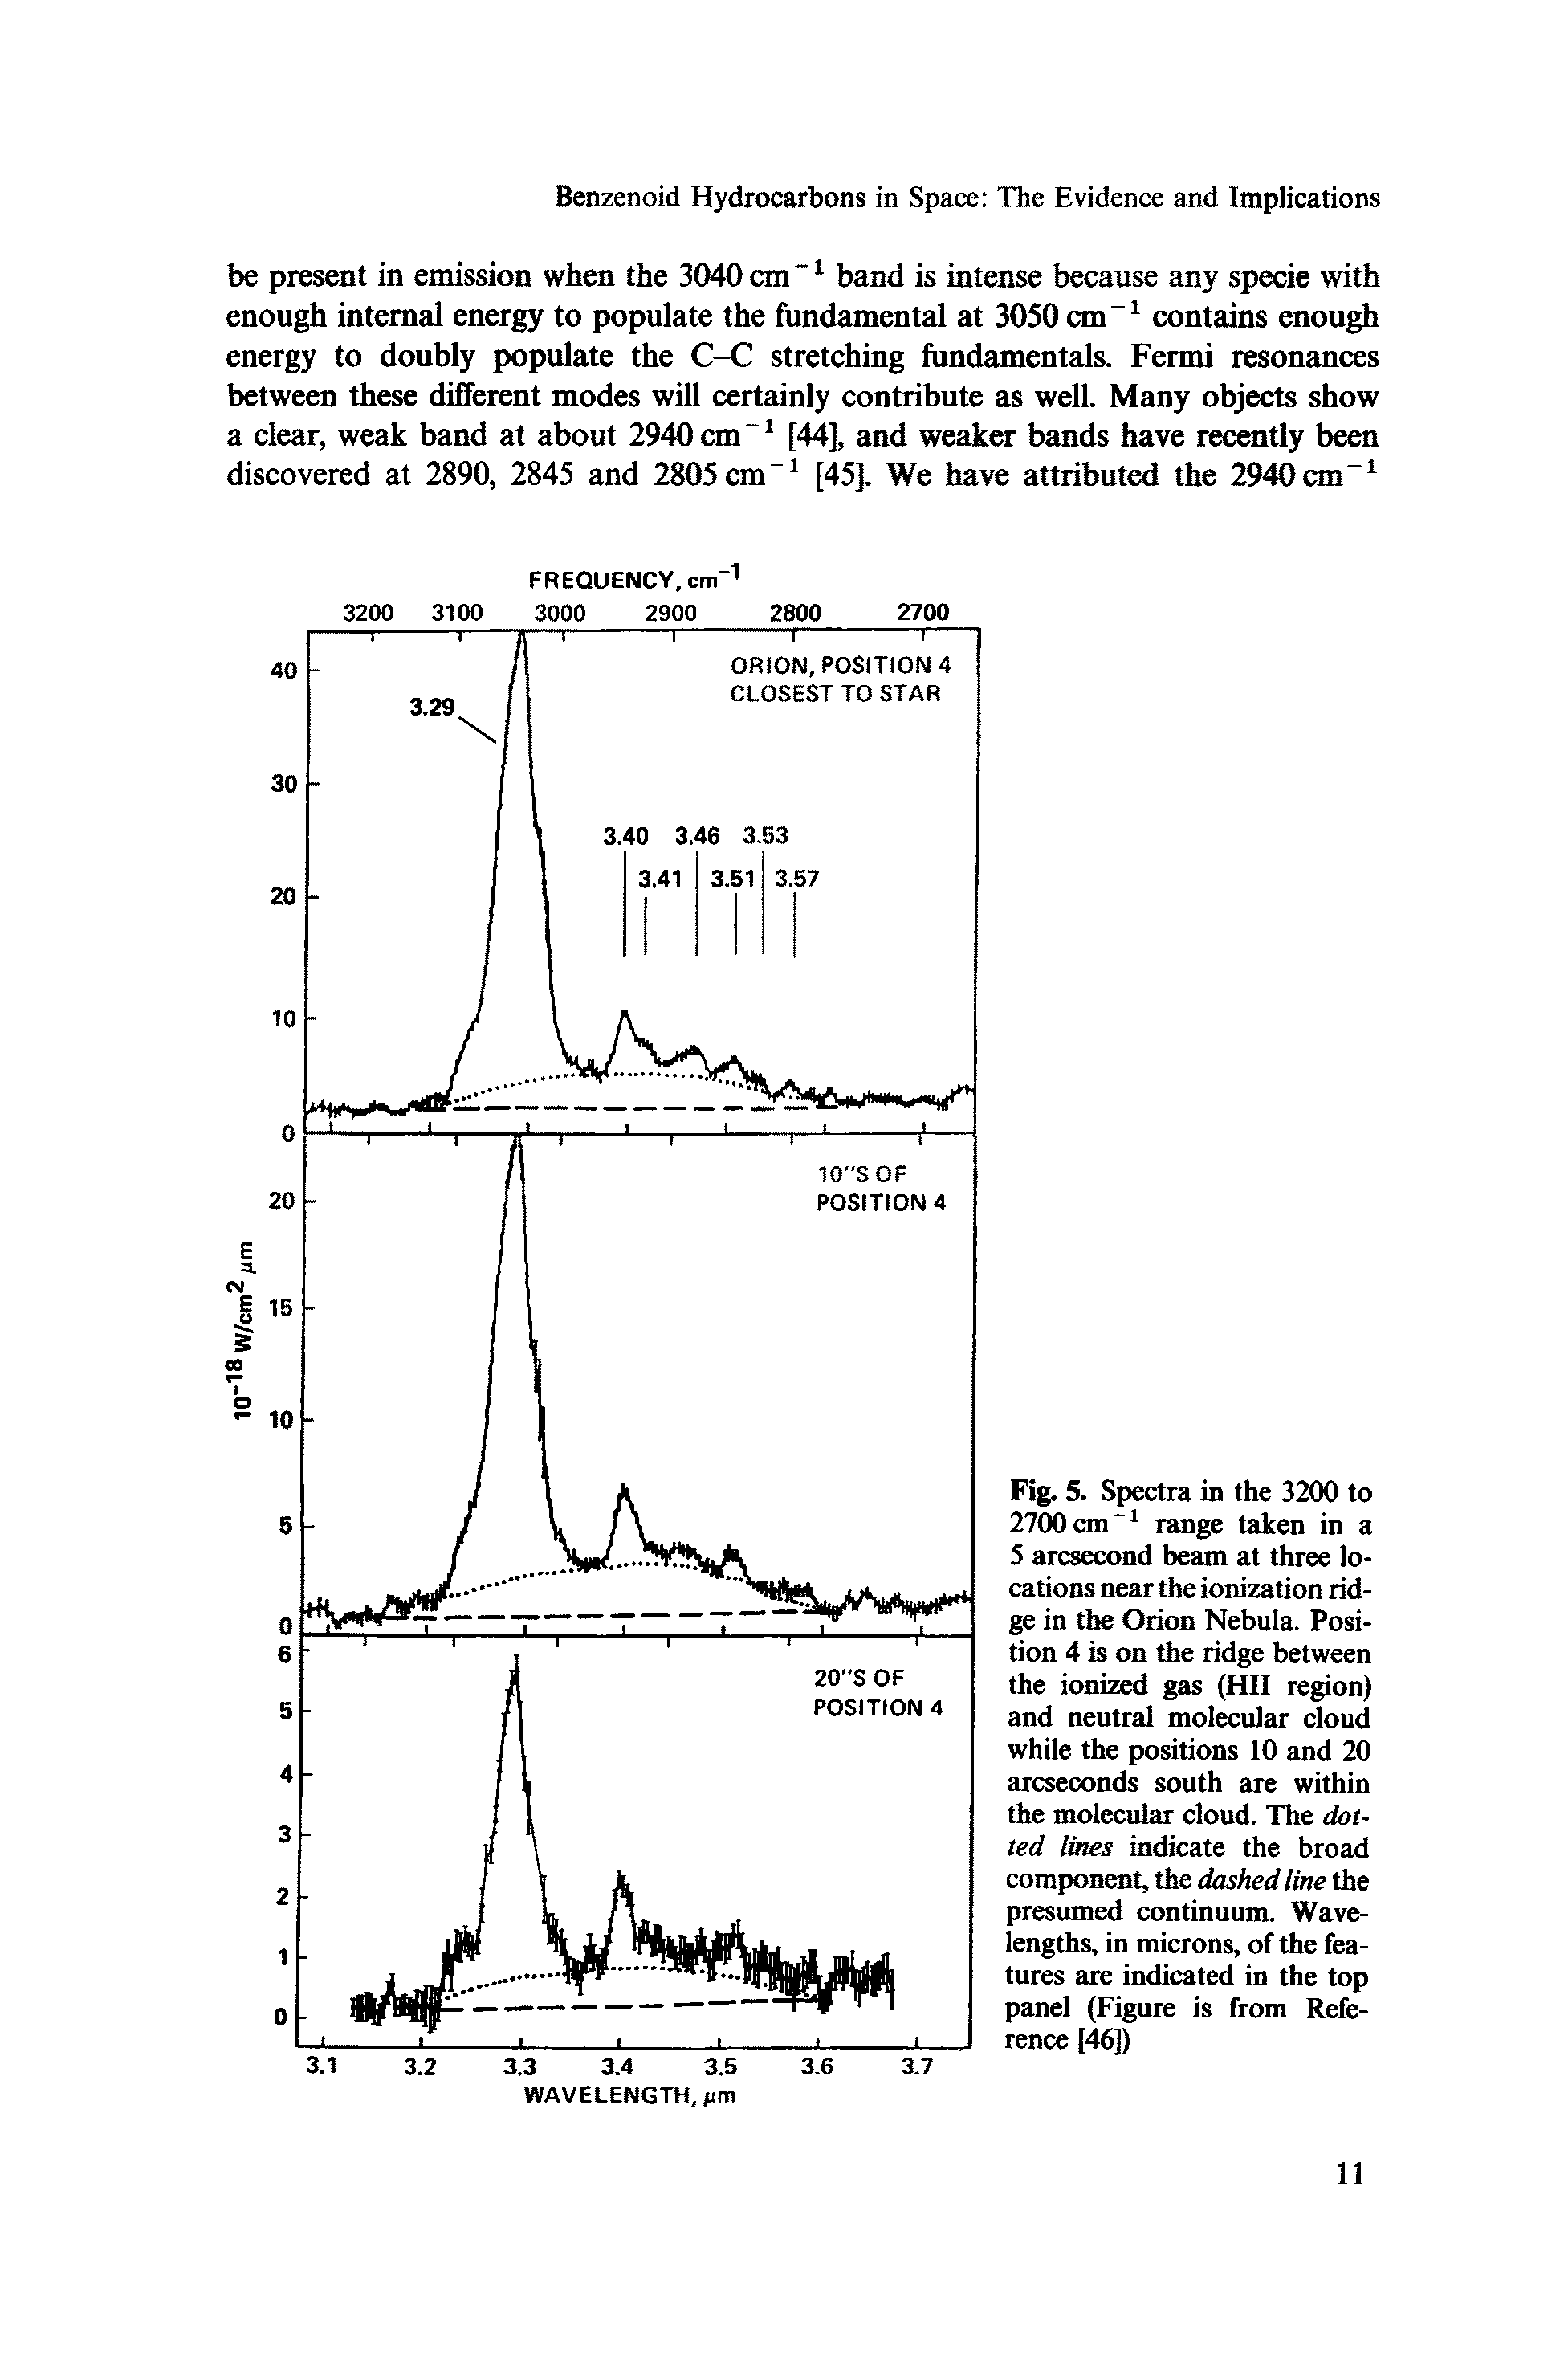 Fig. 5. Spectra in the 3200 to 2700 cm-1 range taken in a 5 arcsecond beam at three locations near the ionization ridge in the Orion Nebula. Position 4 is on the ridge between the ionized gas (HII region) and neutral molecular cloud while the positions 10 and 20 arcseconds south are within the molecular cloud. The dotted lines indicate the broad component, the dashed line the presumed continuum. Wavelengths, in microns, of the features are indicated in the top panel (Figure is from Reference [46])...